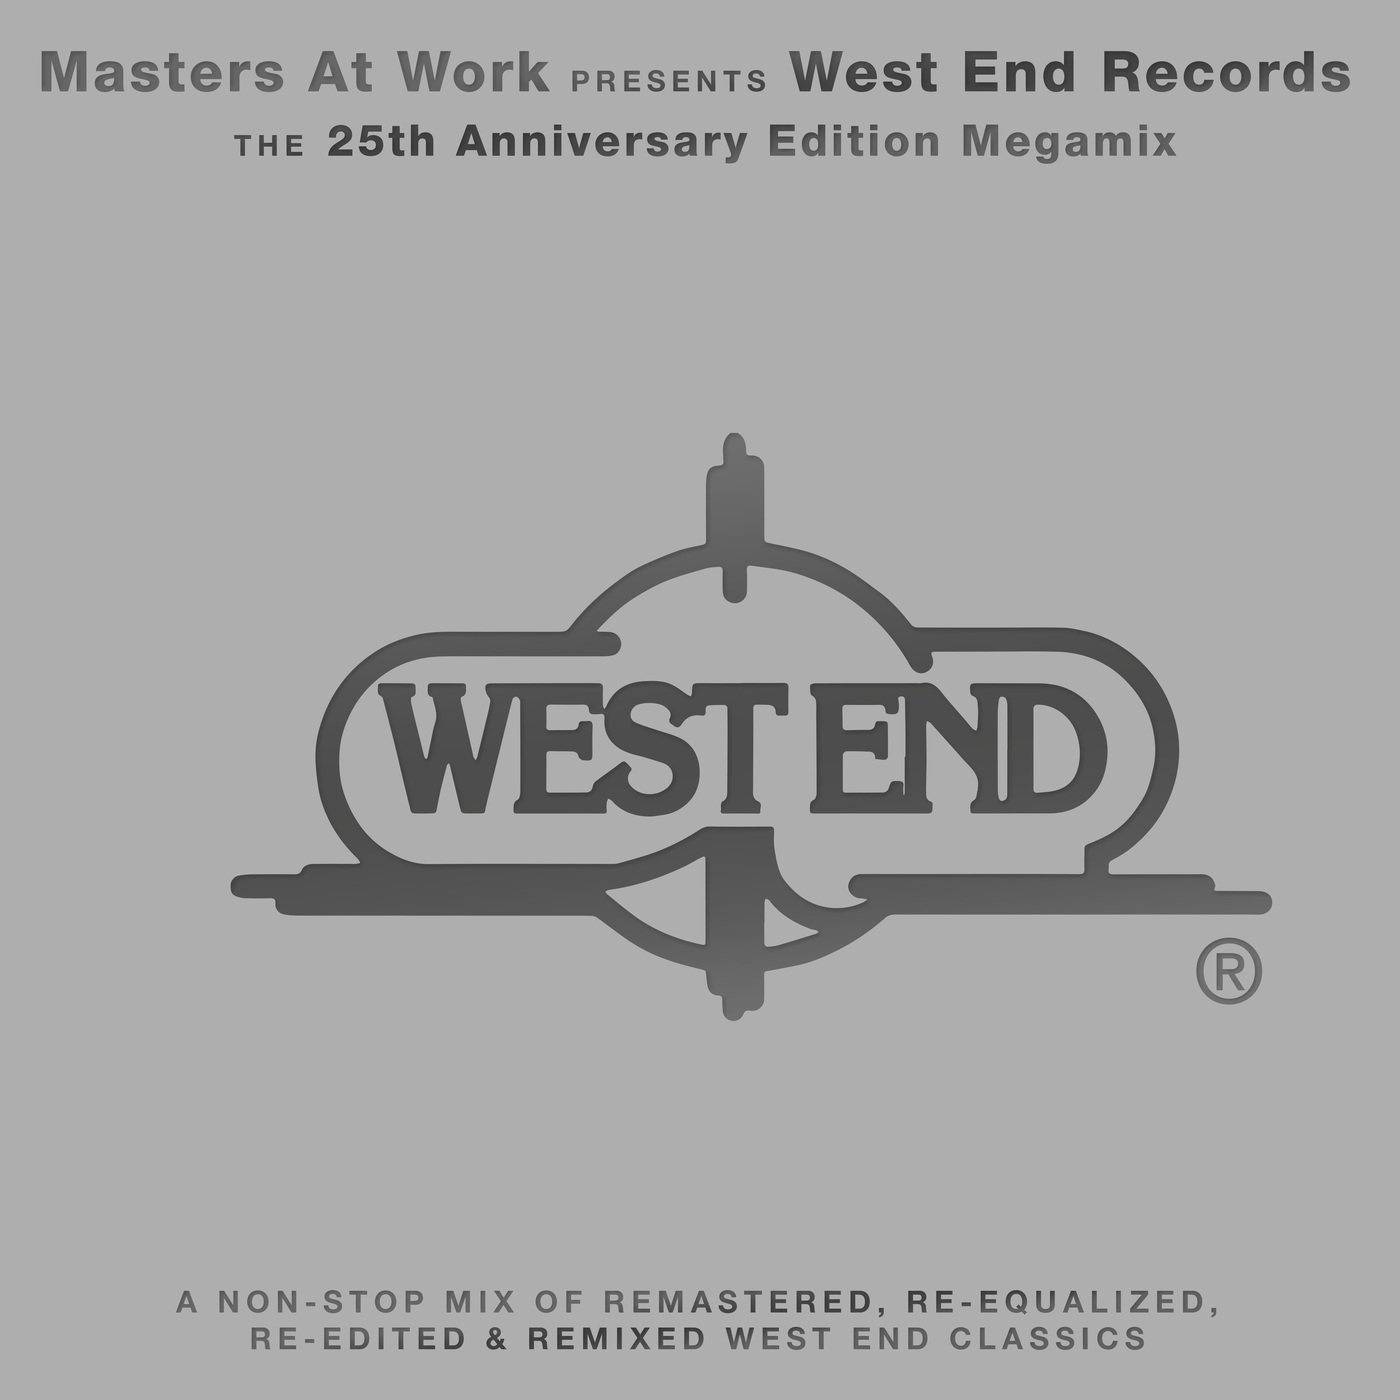 VA - MAW Presents West End Records: The 25th Anniversary (2016 - Remaster) / West End Records